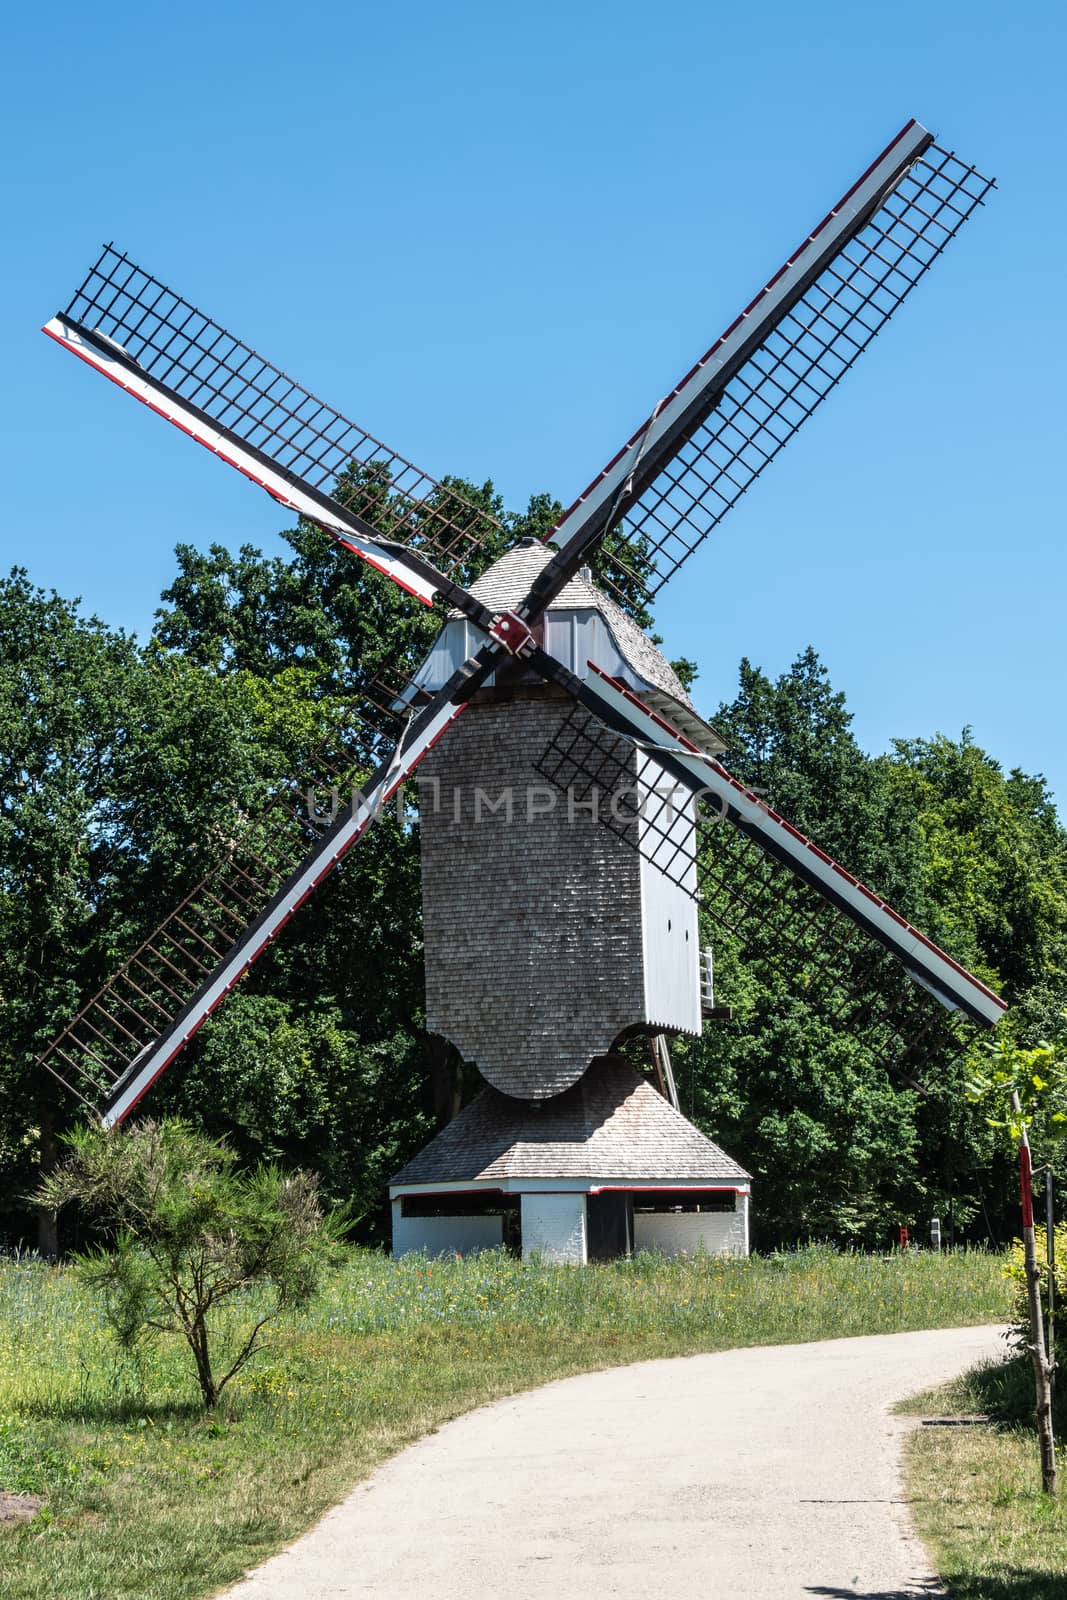 Bokrijk, Belgium - June 27, 2019: Windmill of Schulen is set in green environment of meadow and surrounded by trees under blue sky. No sails on wings.